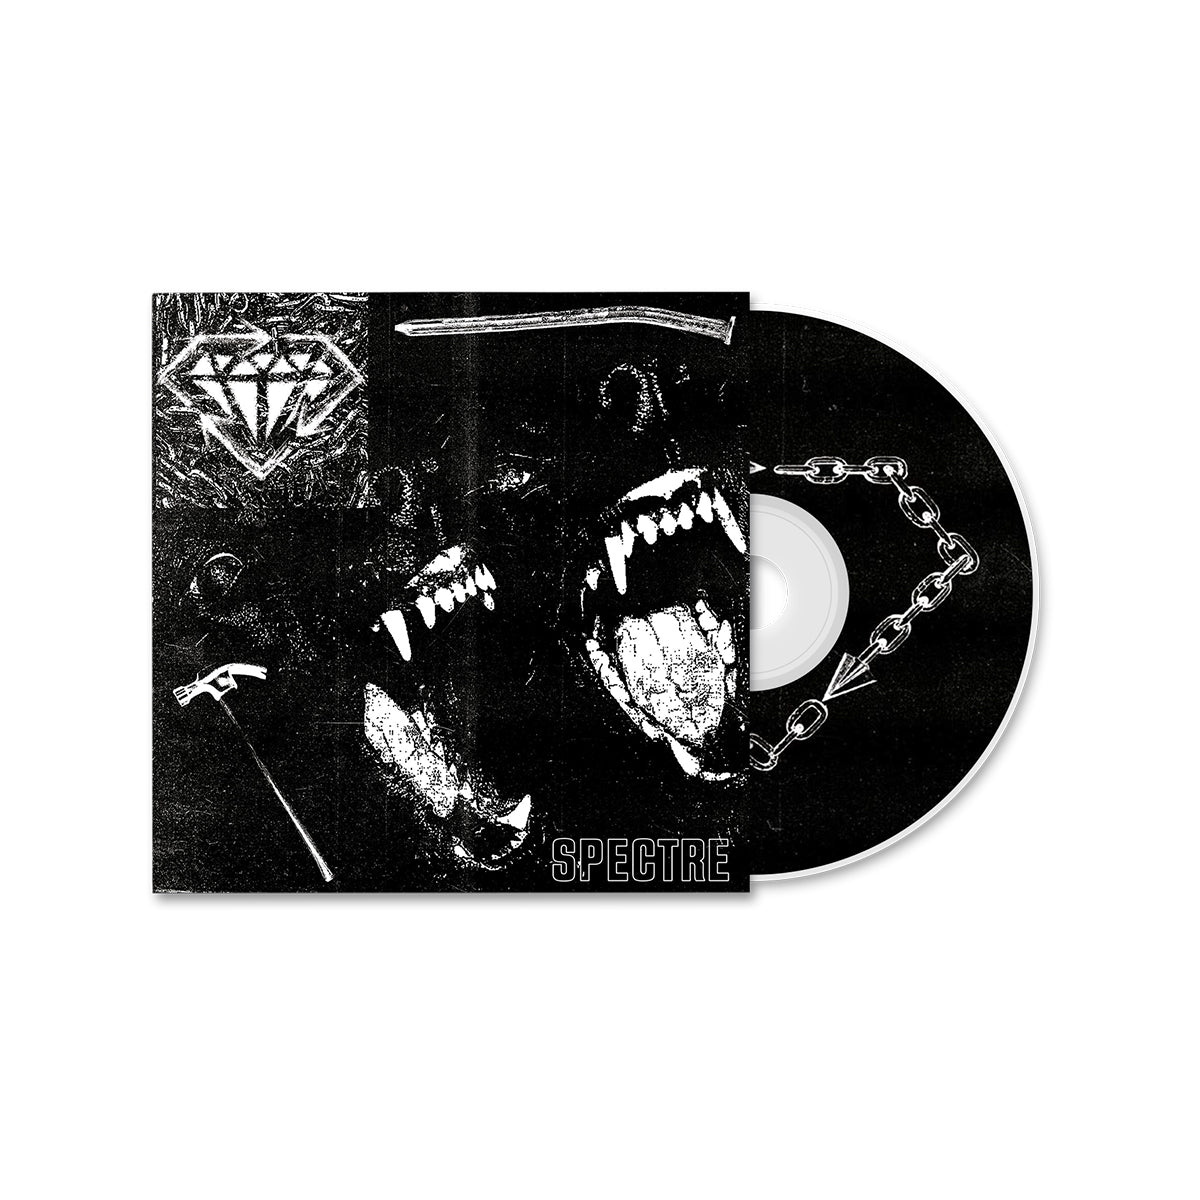 STICK TO YOUR GUNS "Spectre" CD